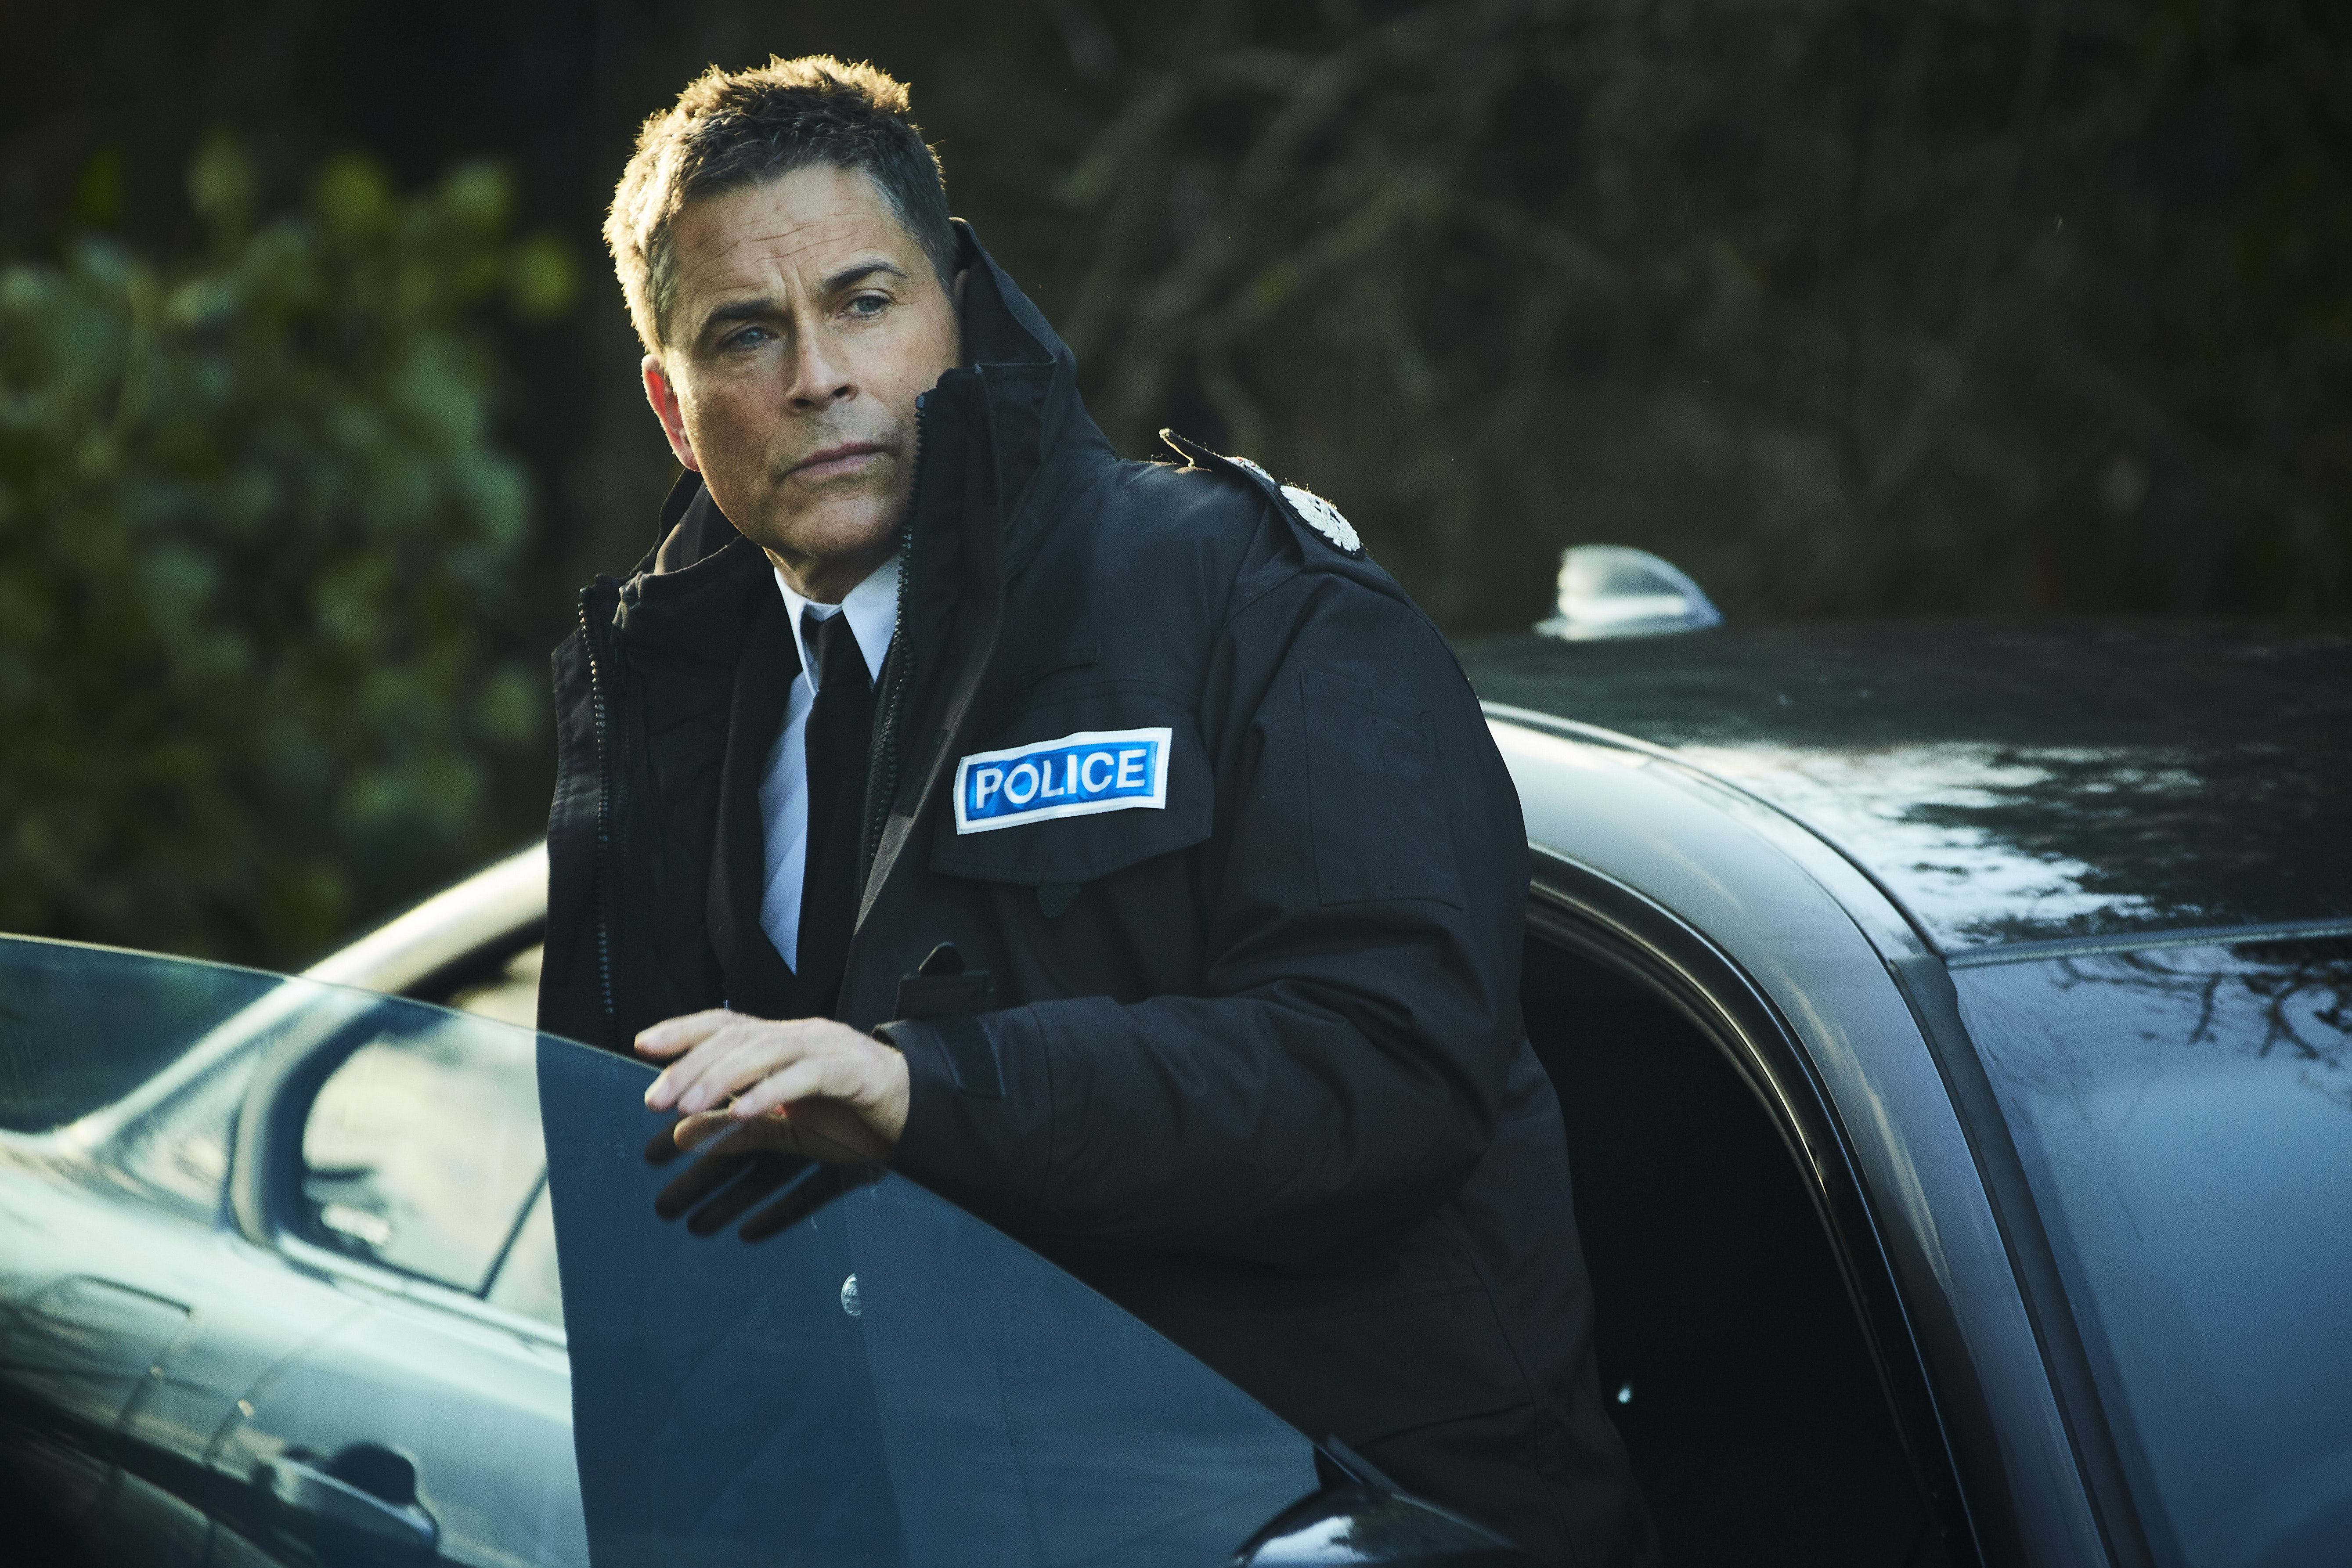 BritBox’s August Lineup Includes ‘Wild Bill’ Starring Rob Lowe, and More